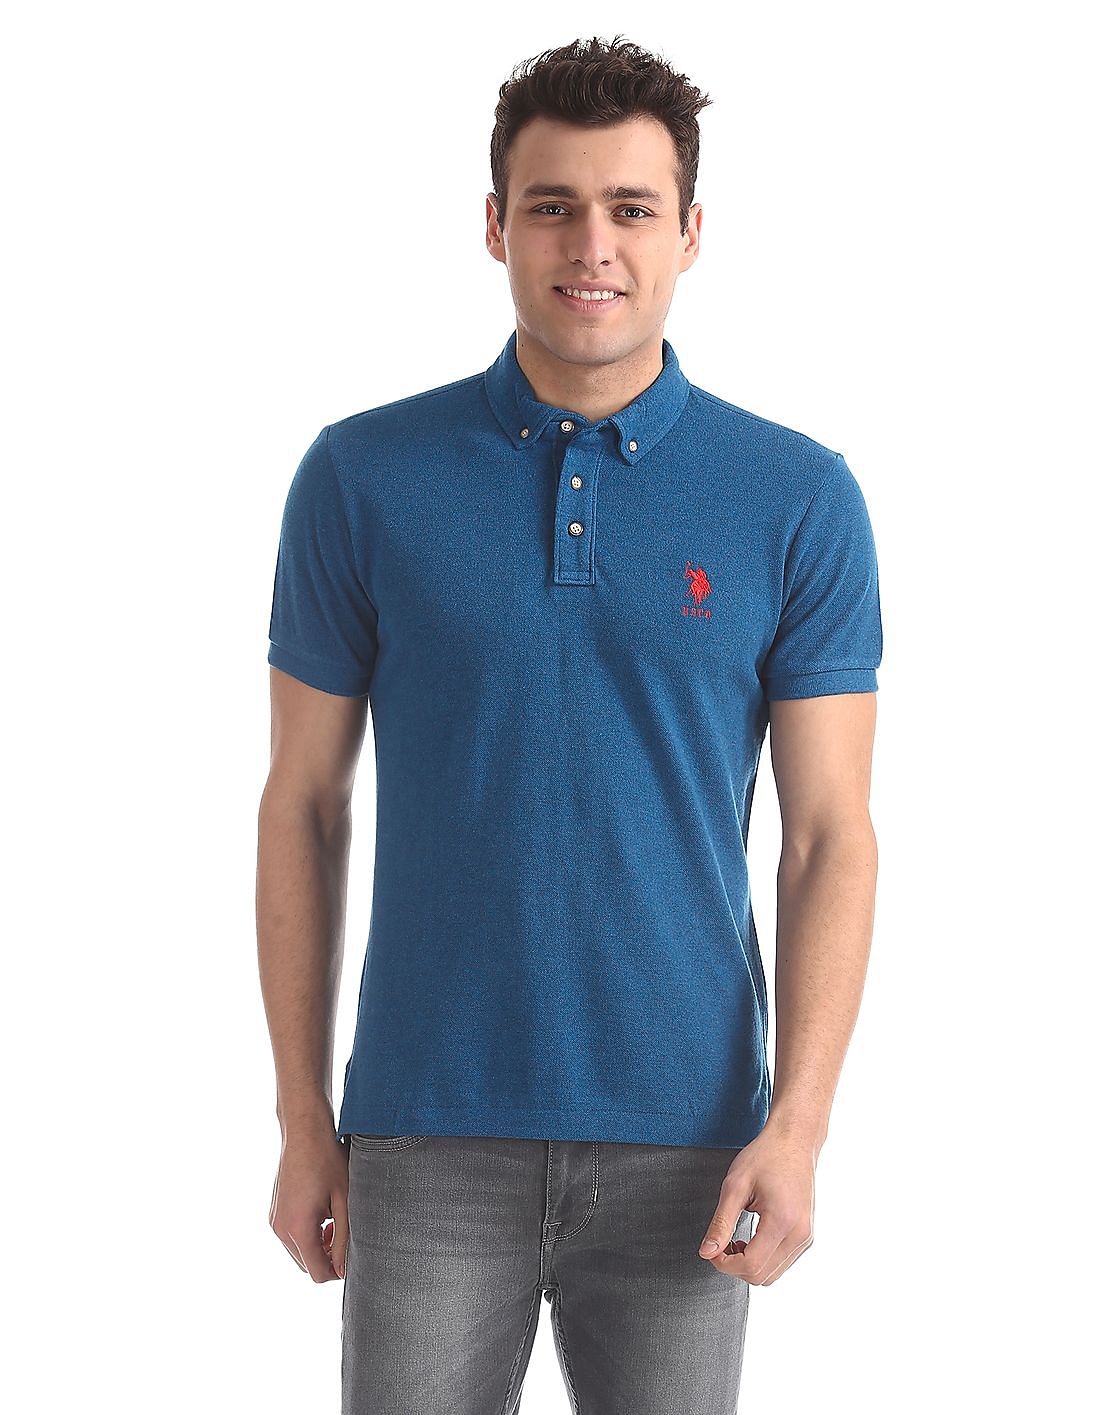 Buy Men Button Down Heathered Polo Shirt online at NNNOW.com